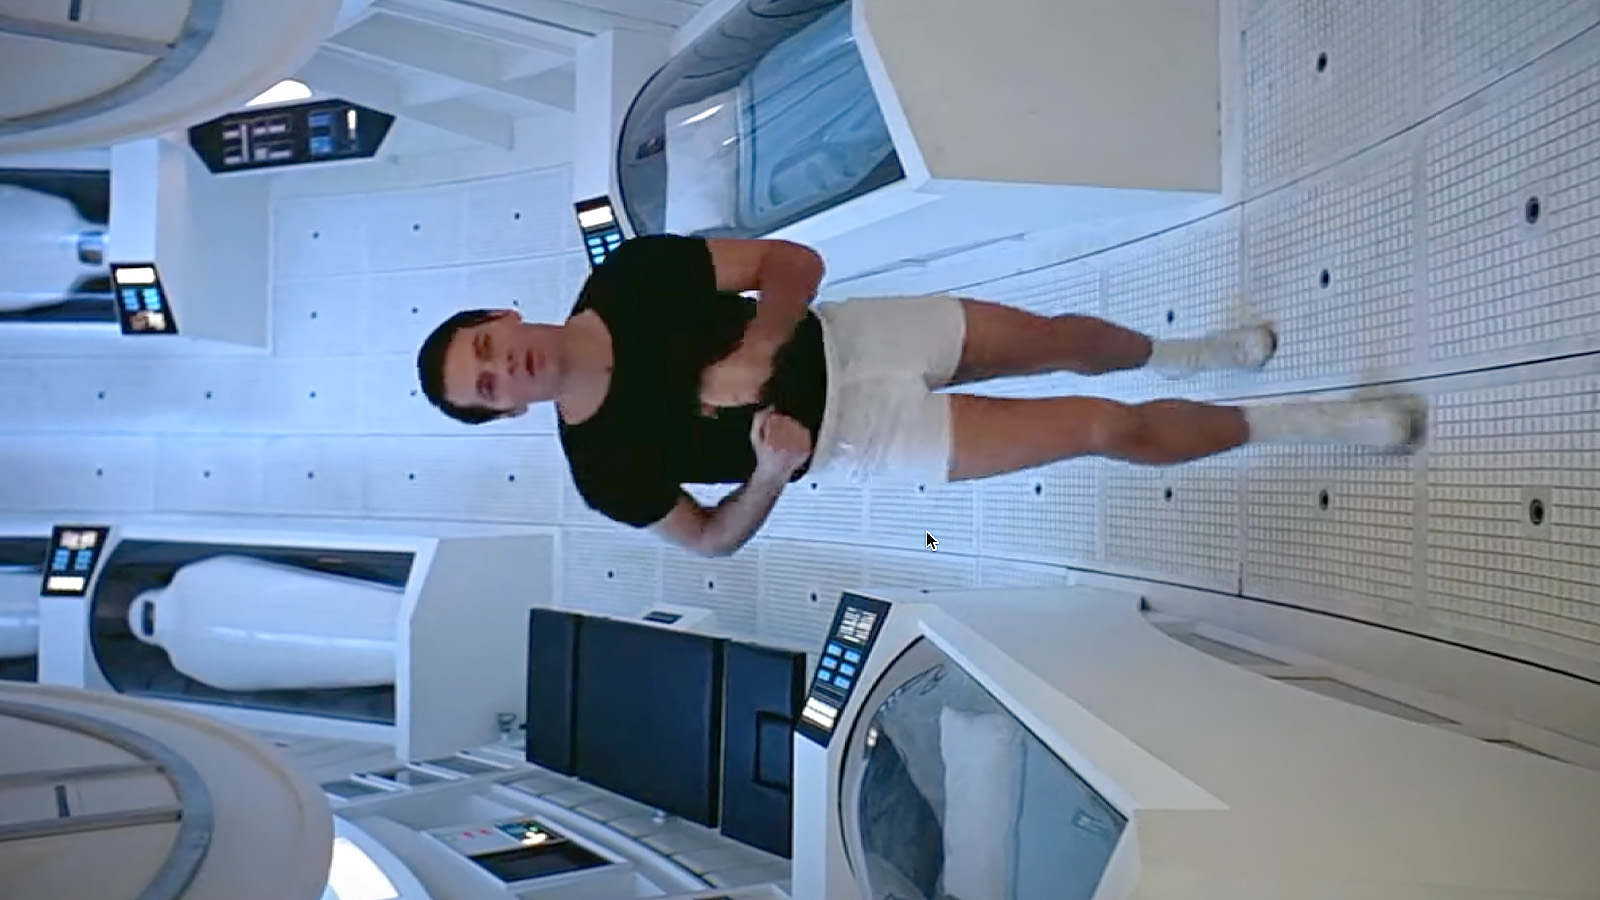 Gary Lockwood takes a morning jog in 2001: A Space Odyssey...